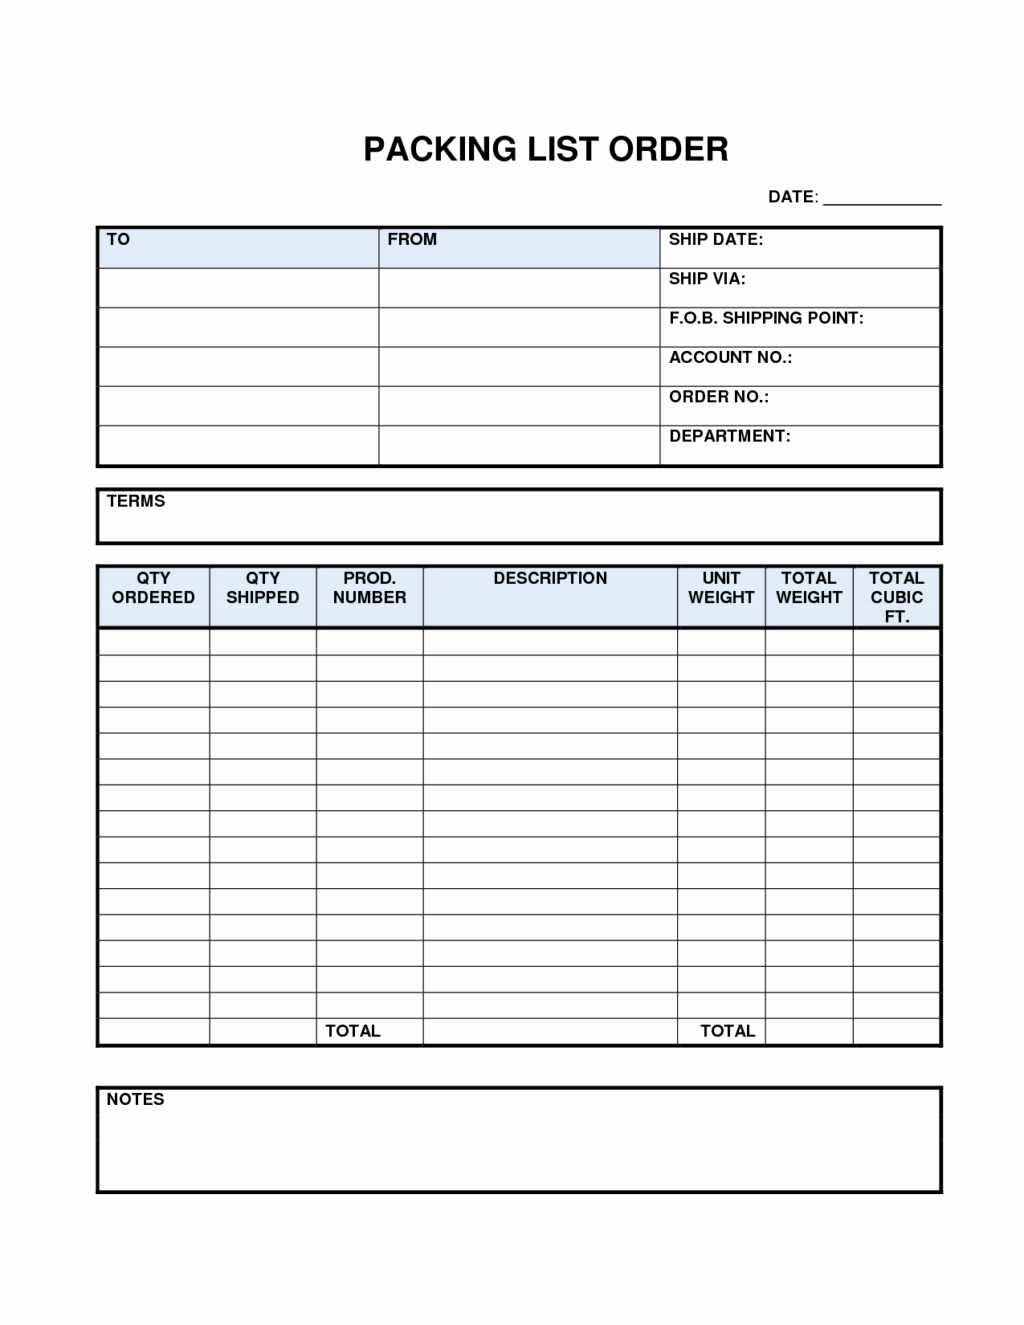 Awesome Packing List and Shipping form Template for Your